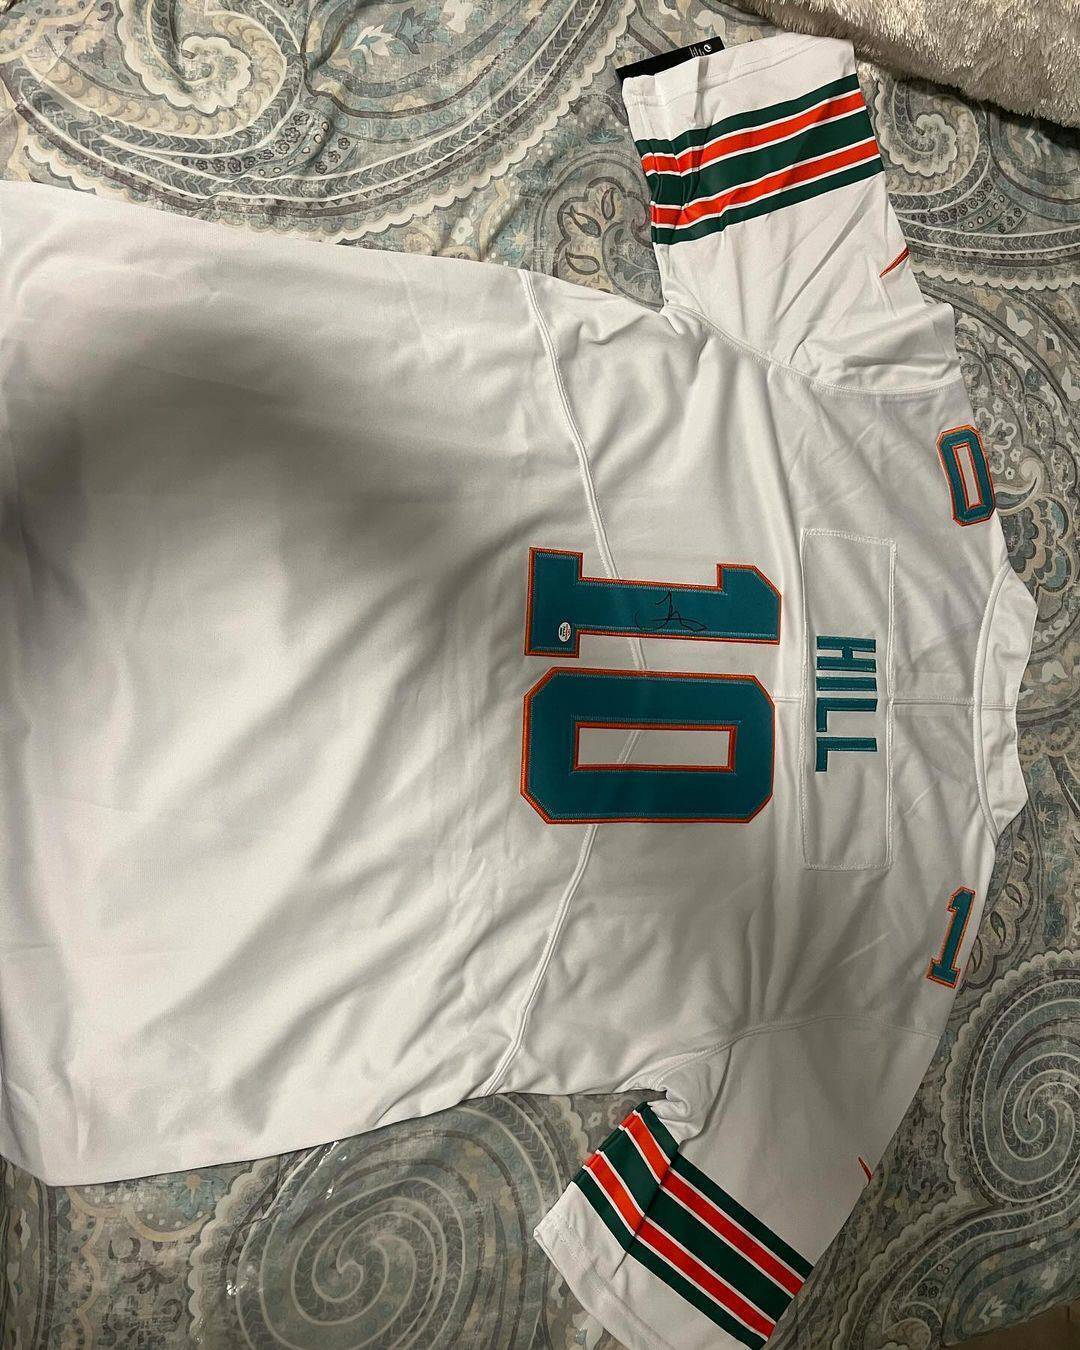 Autographed Official Tyreek Hill Miami Dolphins Jersey